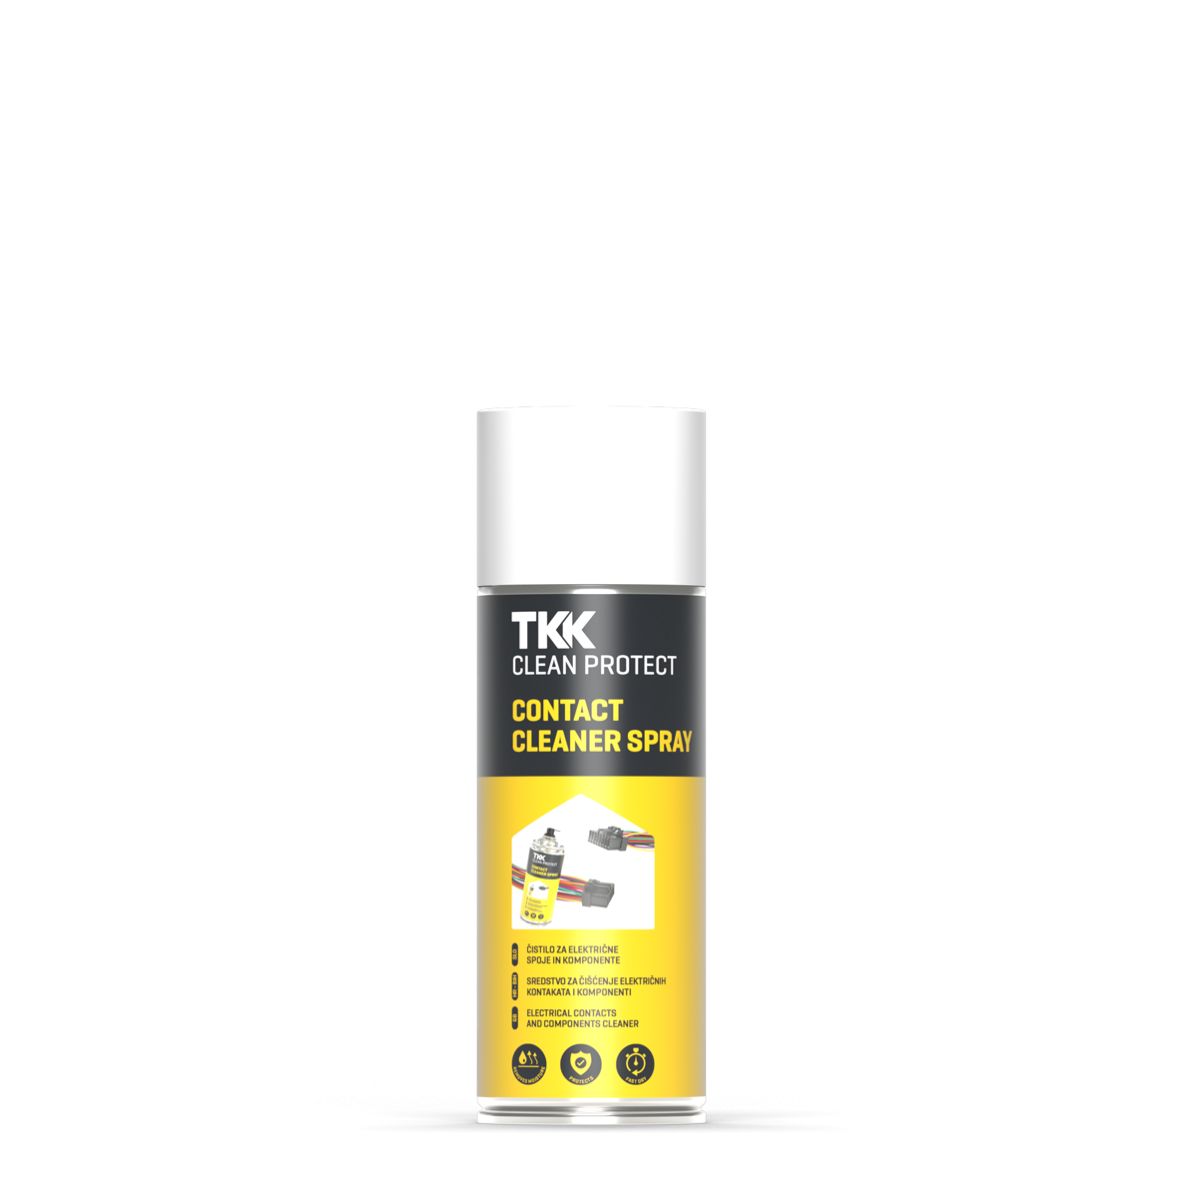 TKK Clean Protect Contact Cleaner Spray